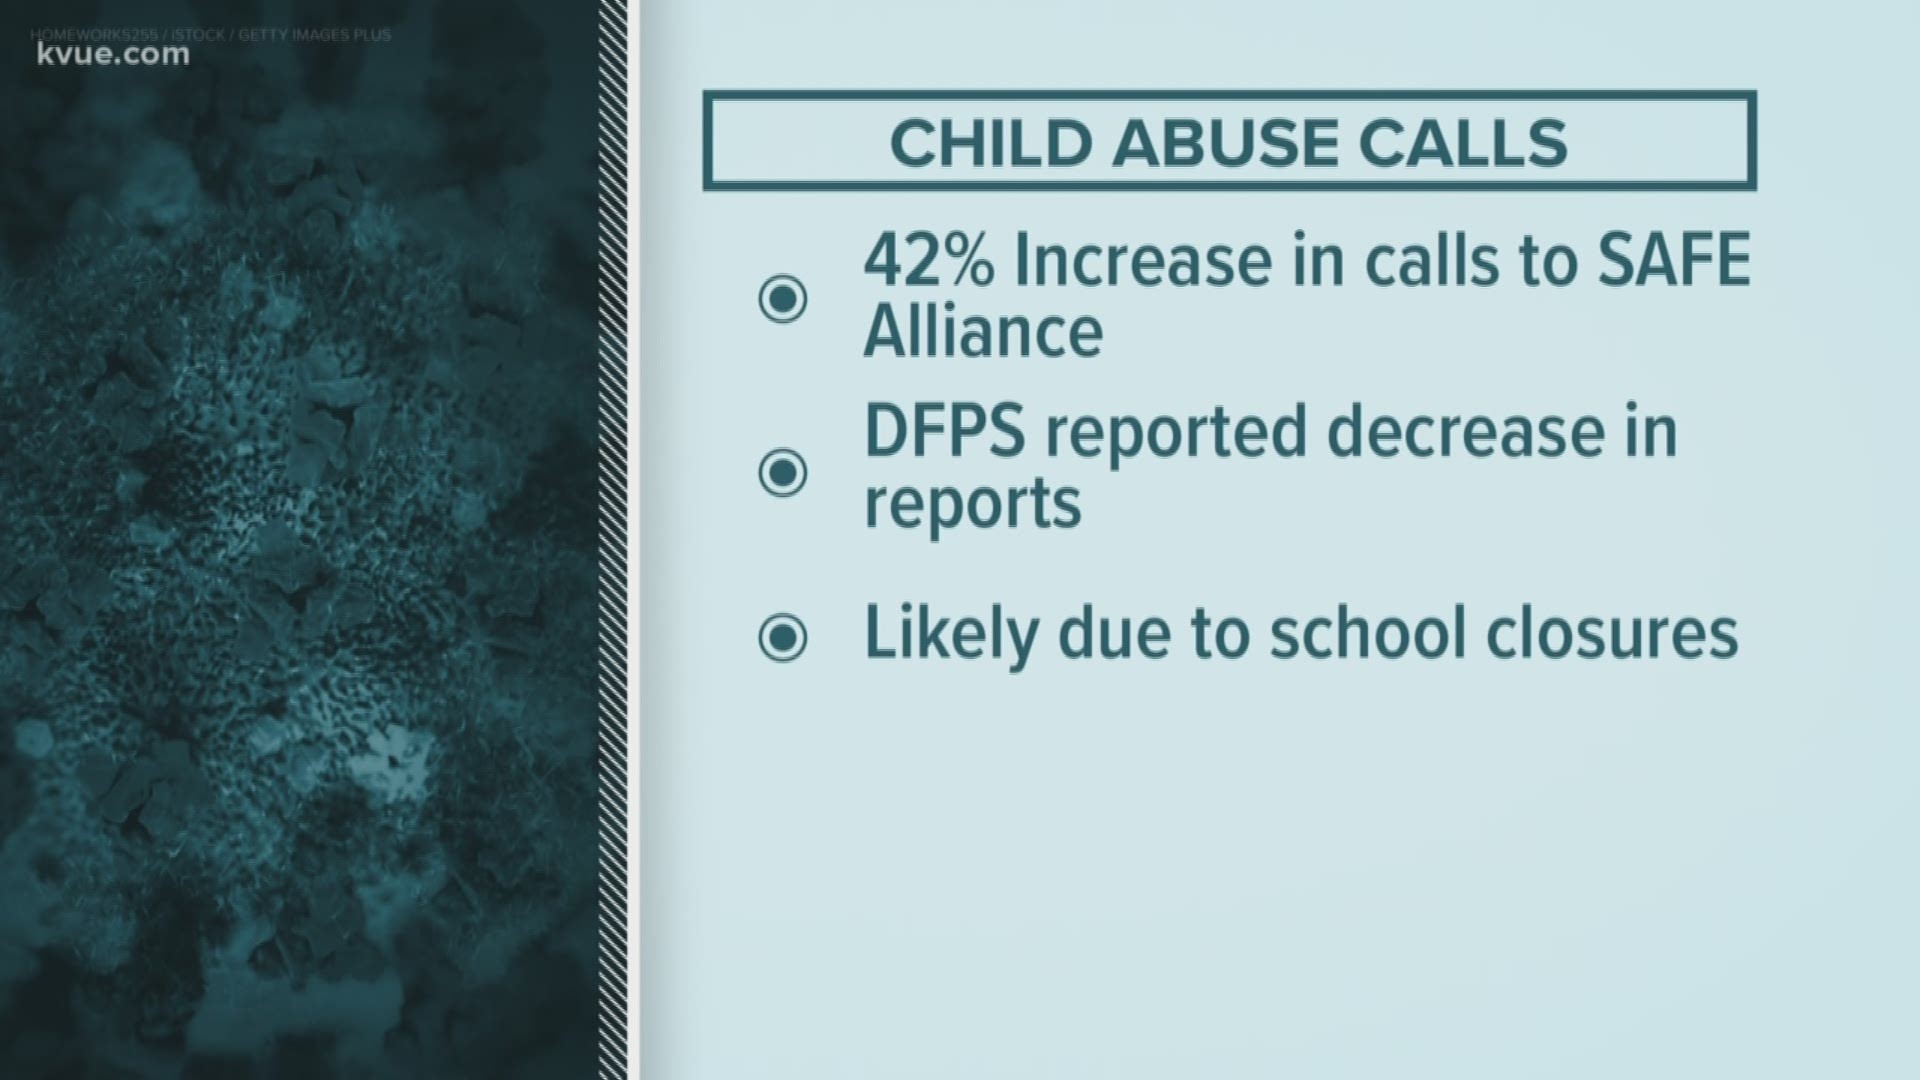 The SAFE Alliance has gotten more calls about child abuse or parenting support than this time last year.